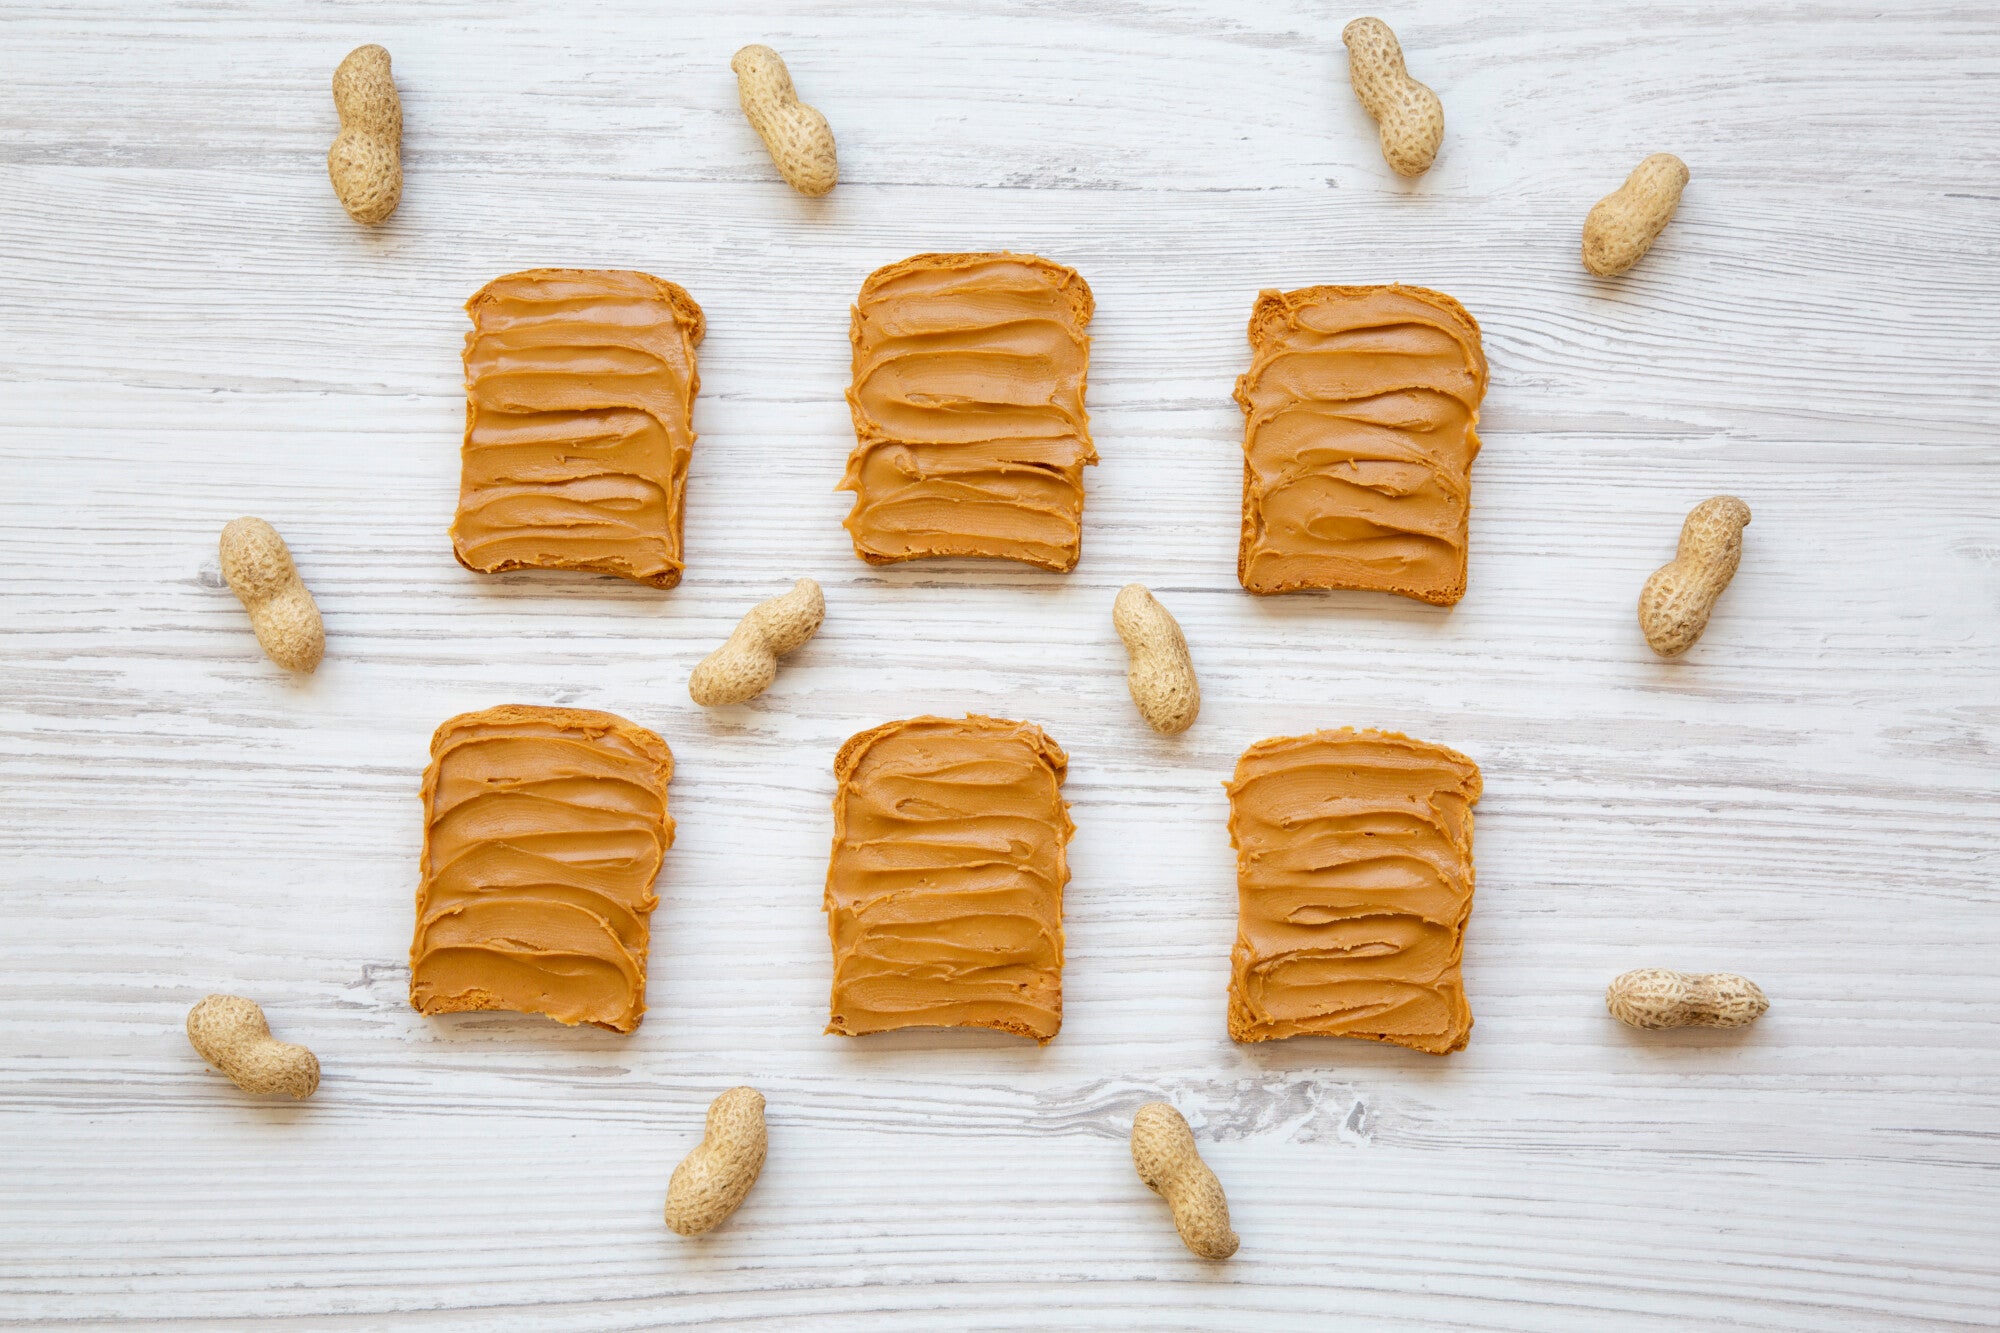 13 Benefits of Eating High Protein Peanut Butter